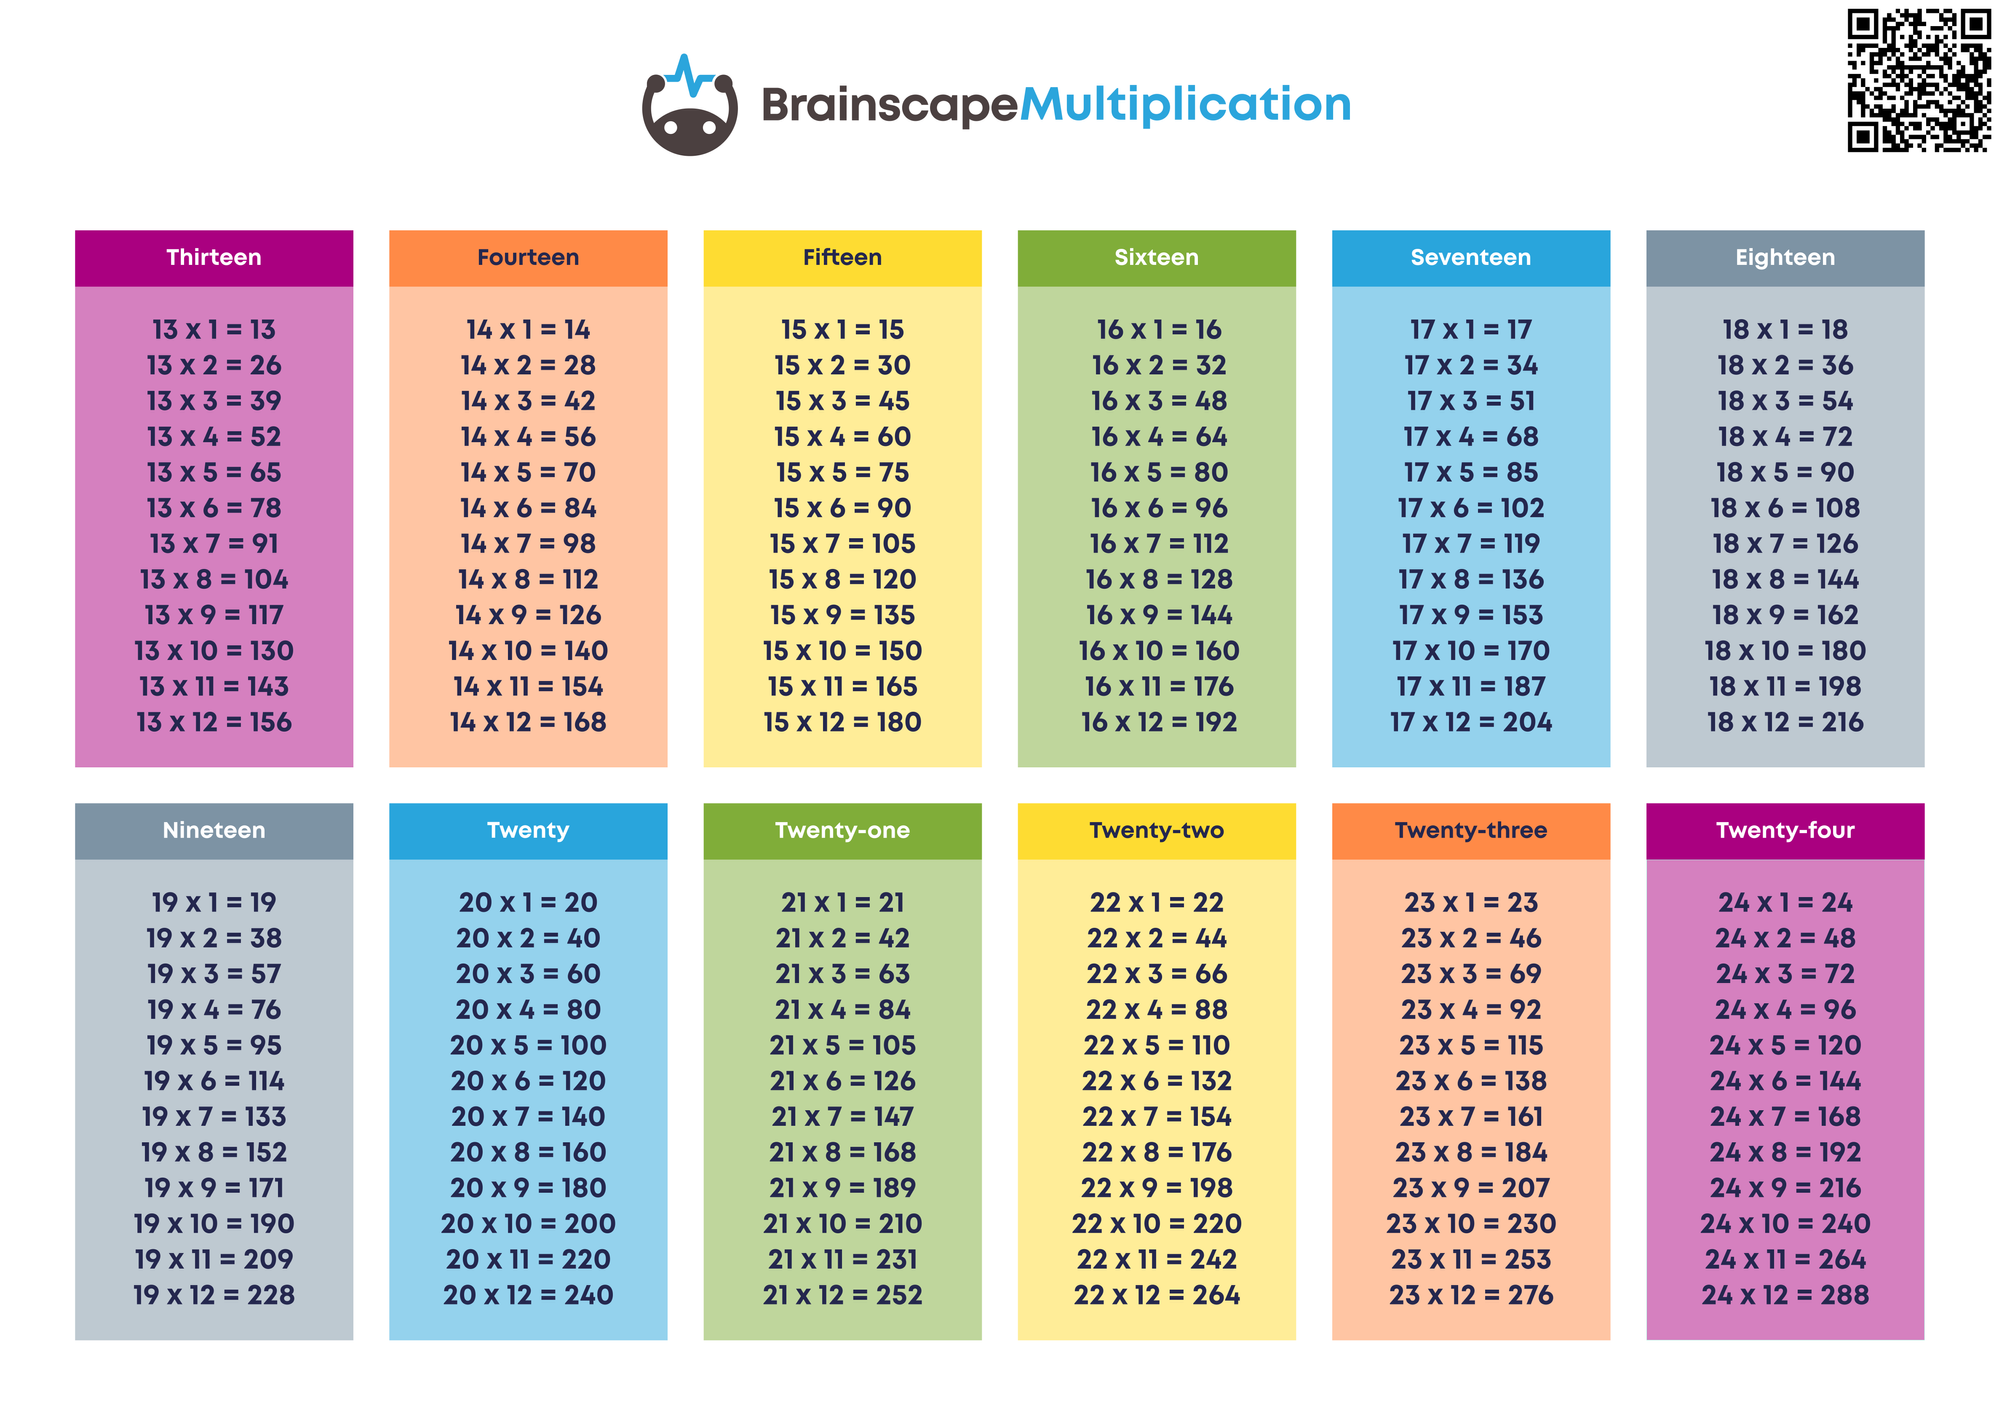 Multiplication tables to print